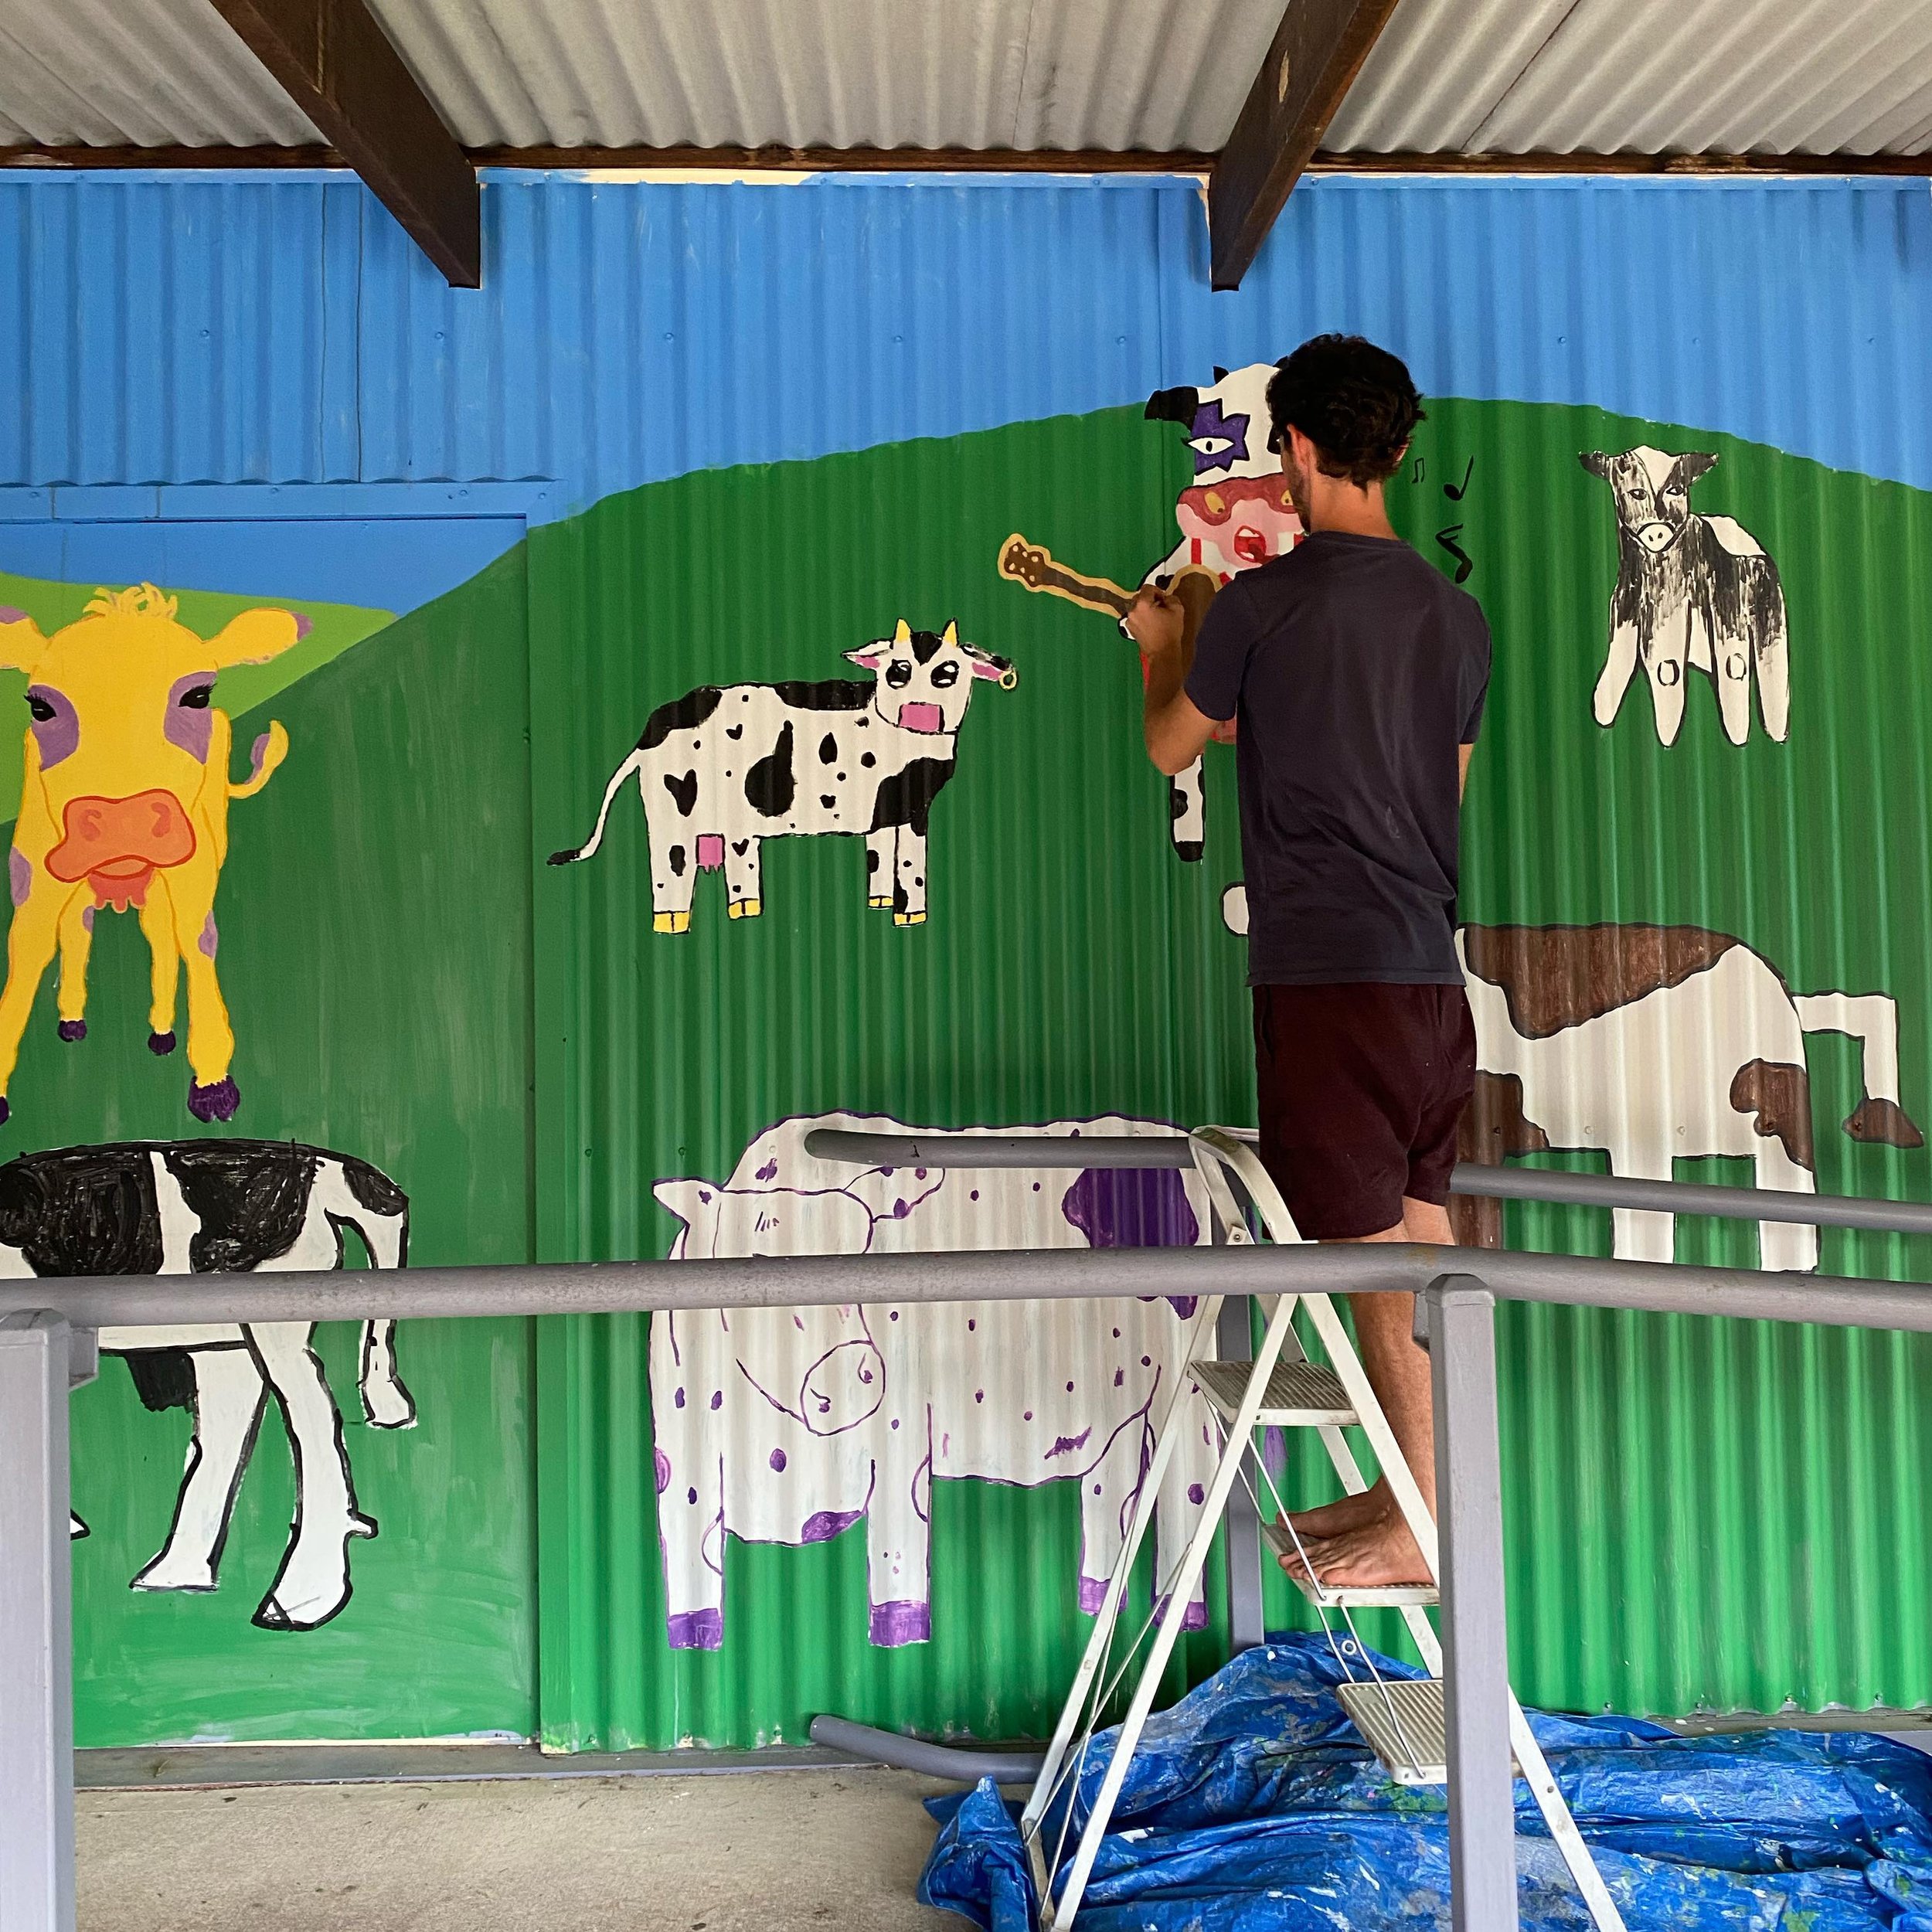 There&rsquo;s still some spots available on the Mooral for anyone interested in adding a personalised cow to the mix. If you are someone with an interest in muralism and yet to take the first step, this might be the opportunity you&rsquo;re looking f